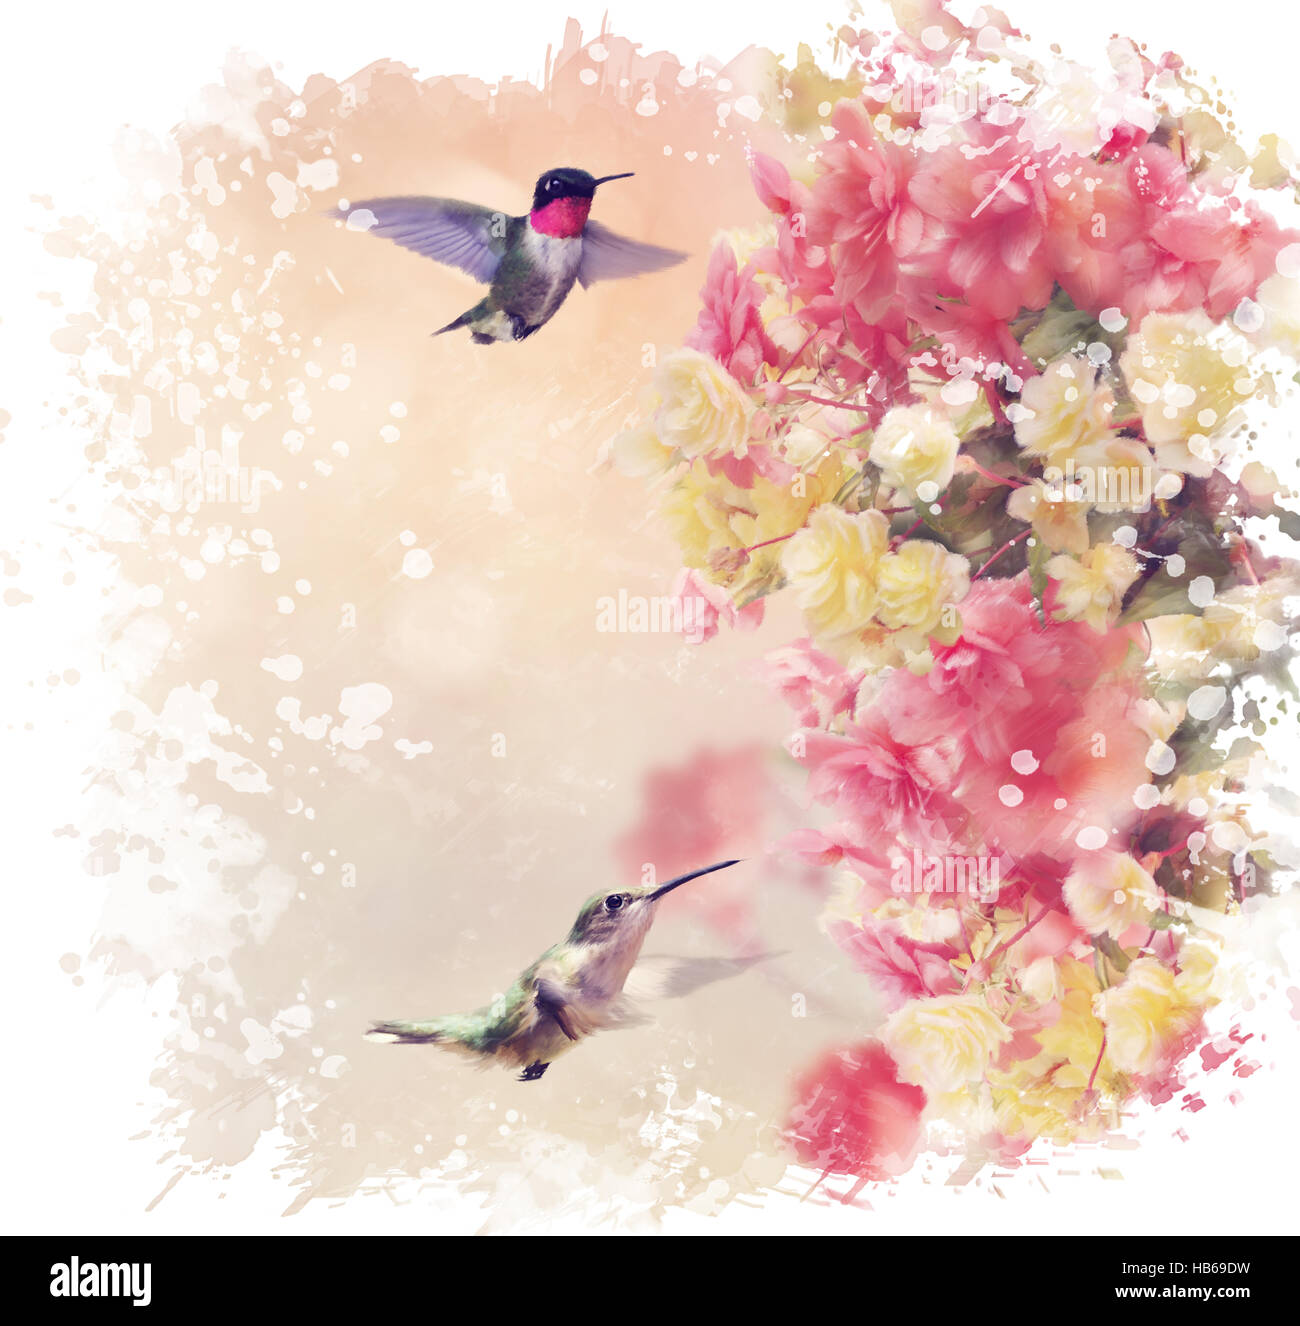 Hummingbirds and Flowers Watercolor Stock Photo